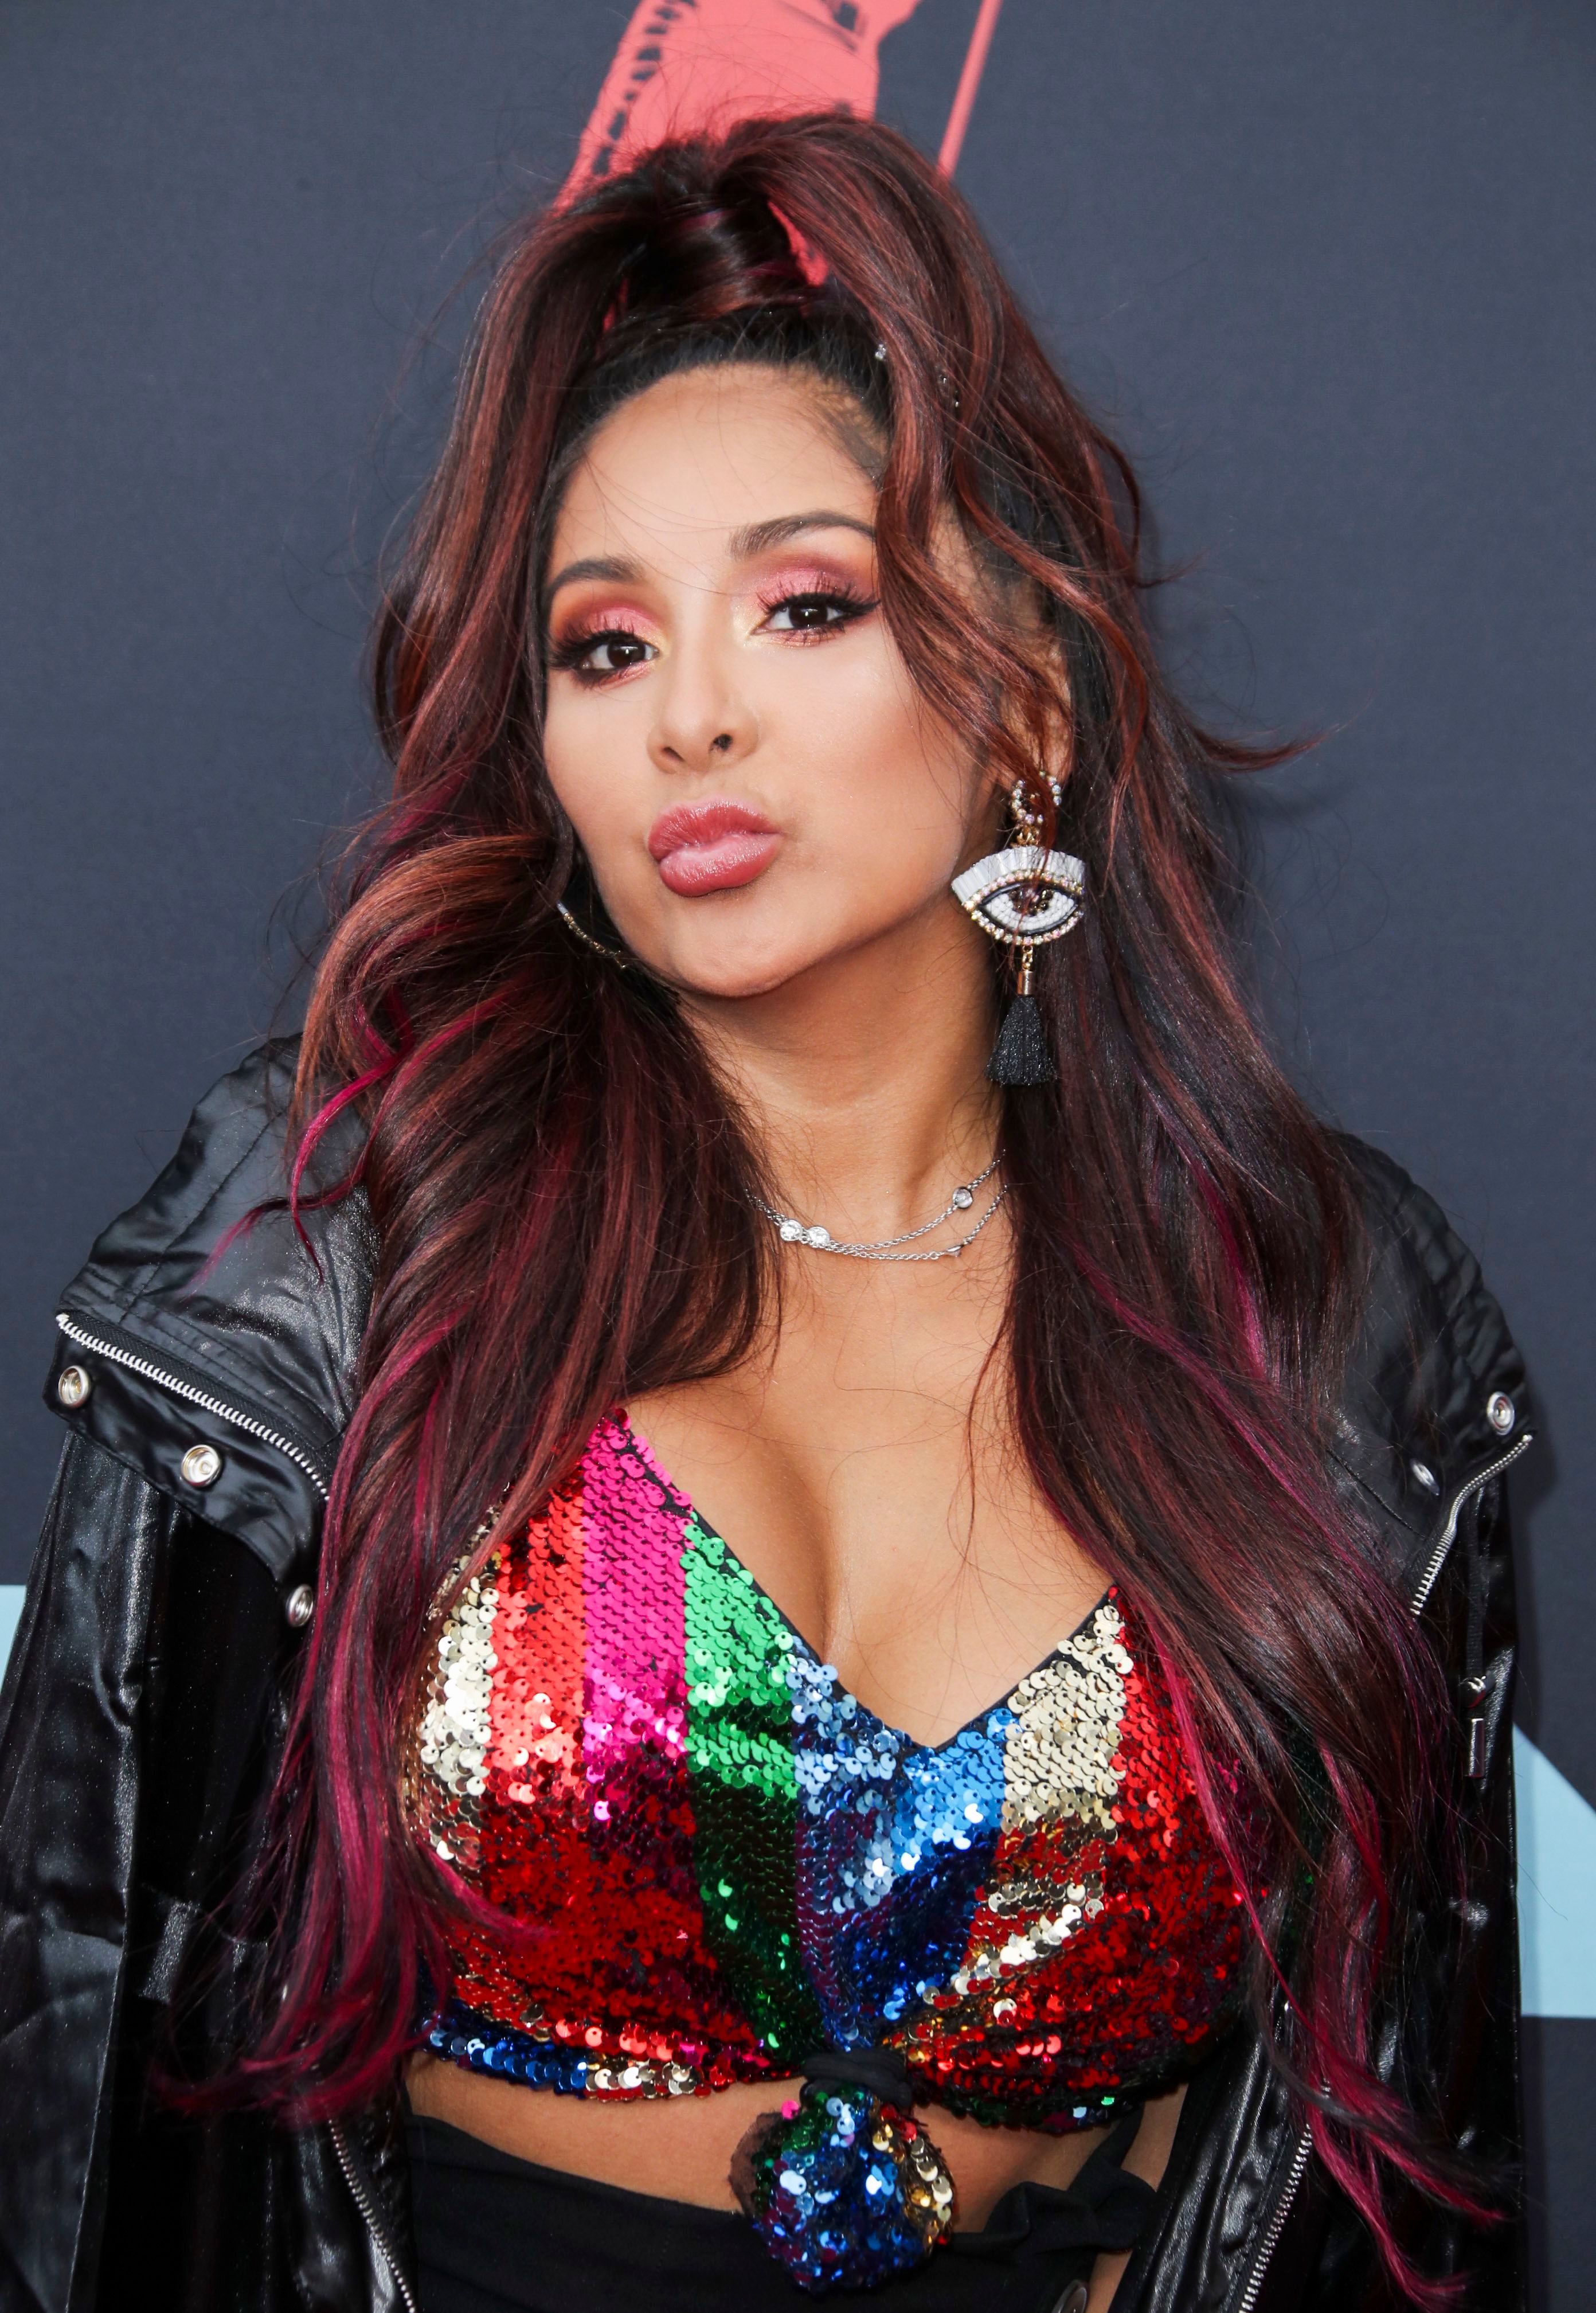 Jersey Shore's Nicole 'Snooki' Polizzi Wants to Get 'Boobs Redone